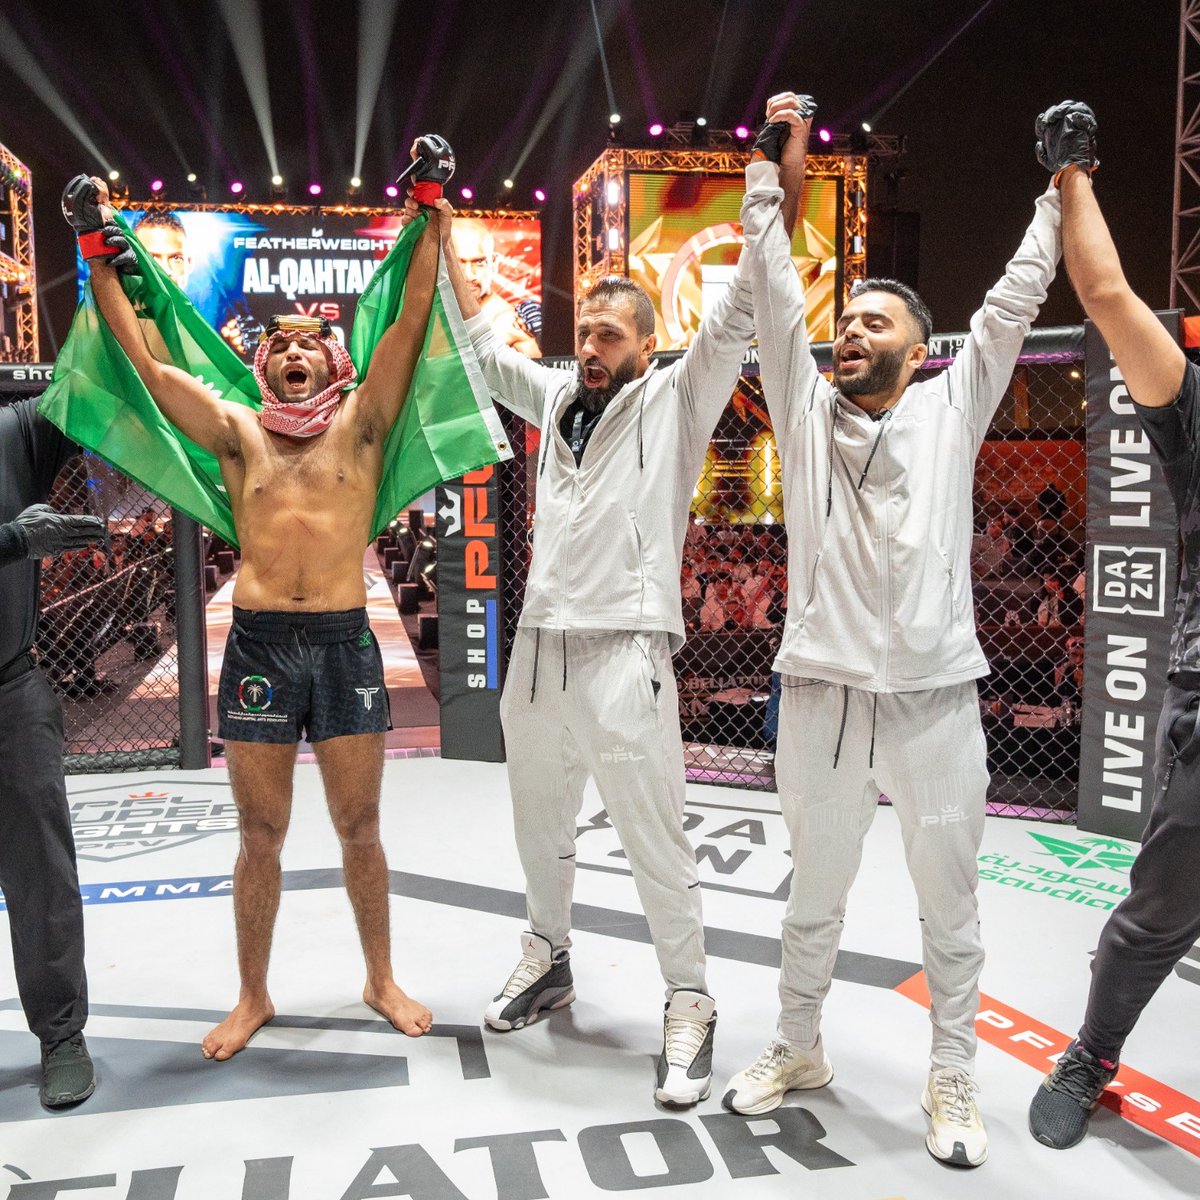 #Throwback to the winning moments from the night that was #PFLvsBellator in Saudi 🔥

#PFL #MMA #MakingHistory #SaudiArabia #MENA